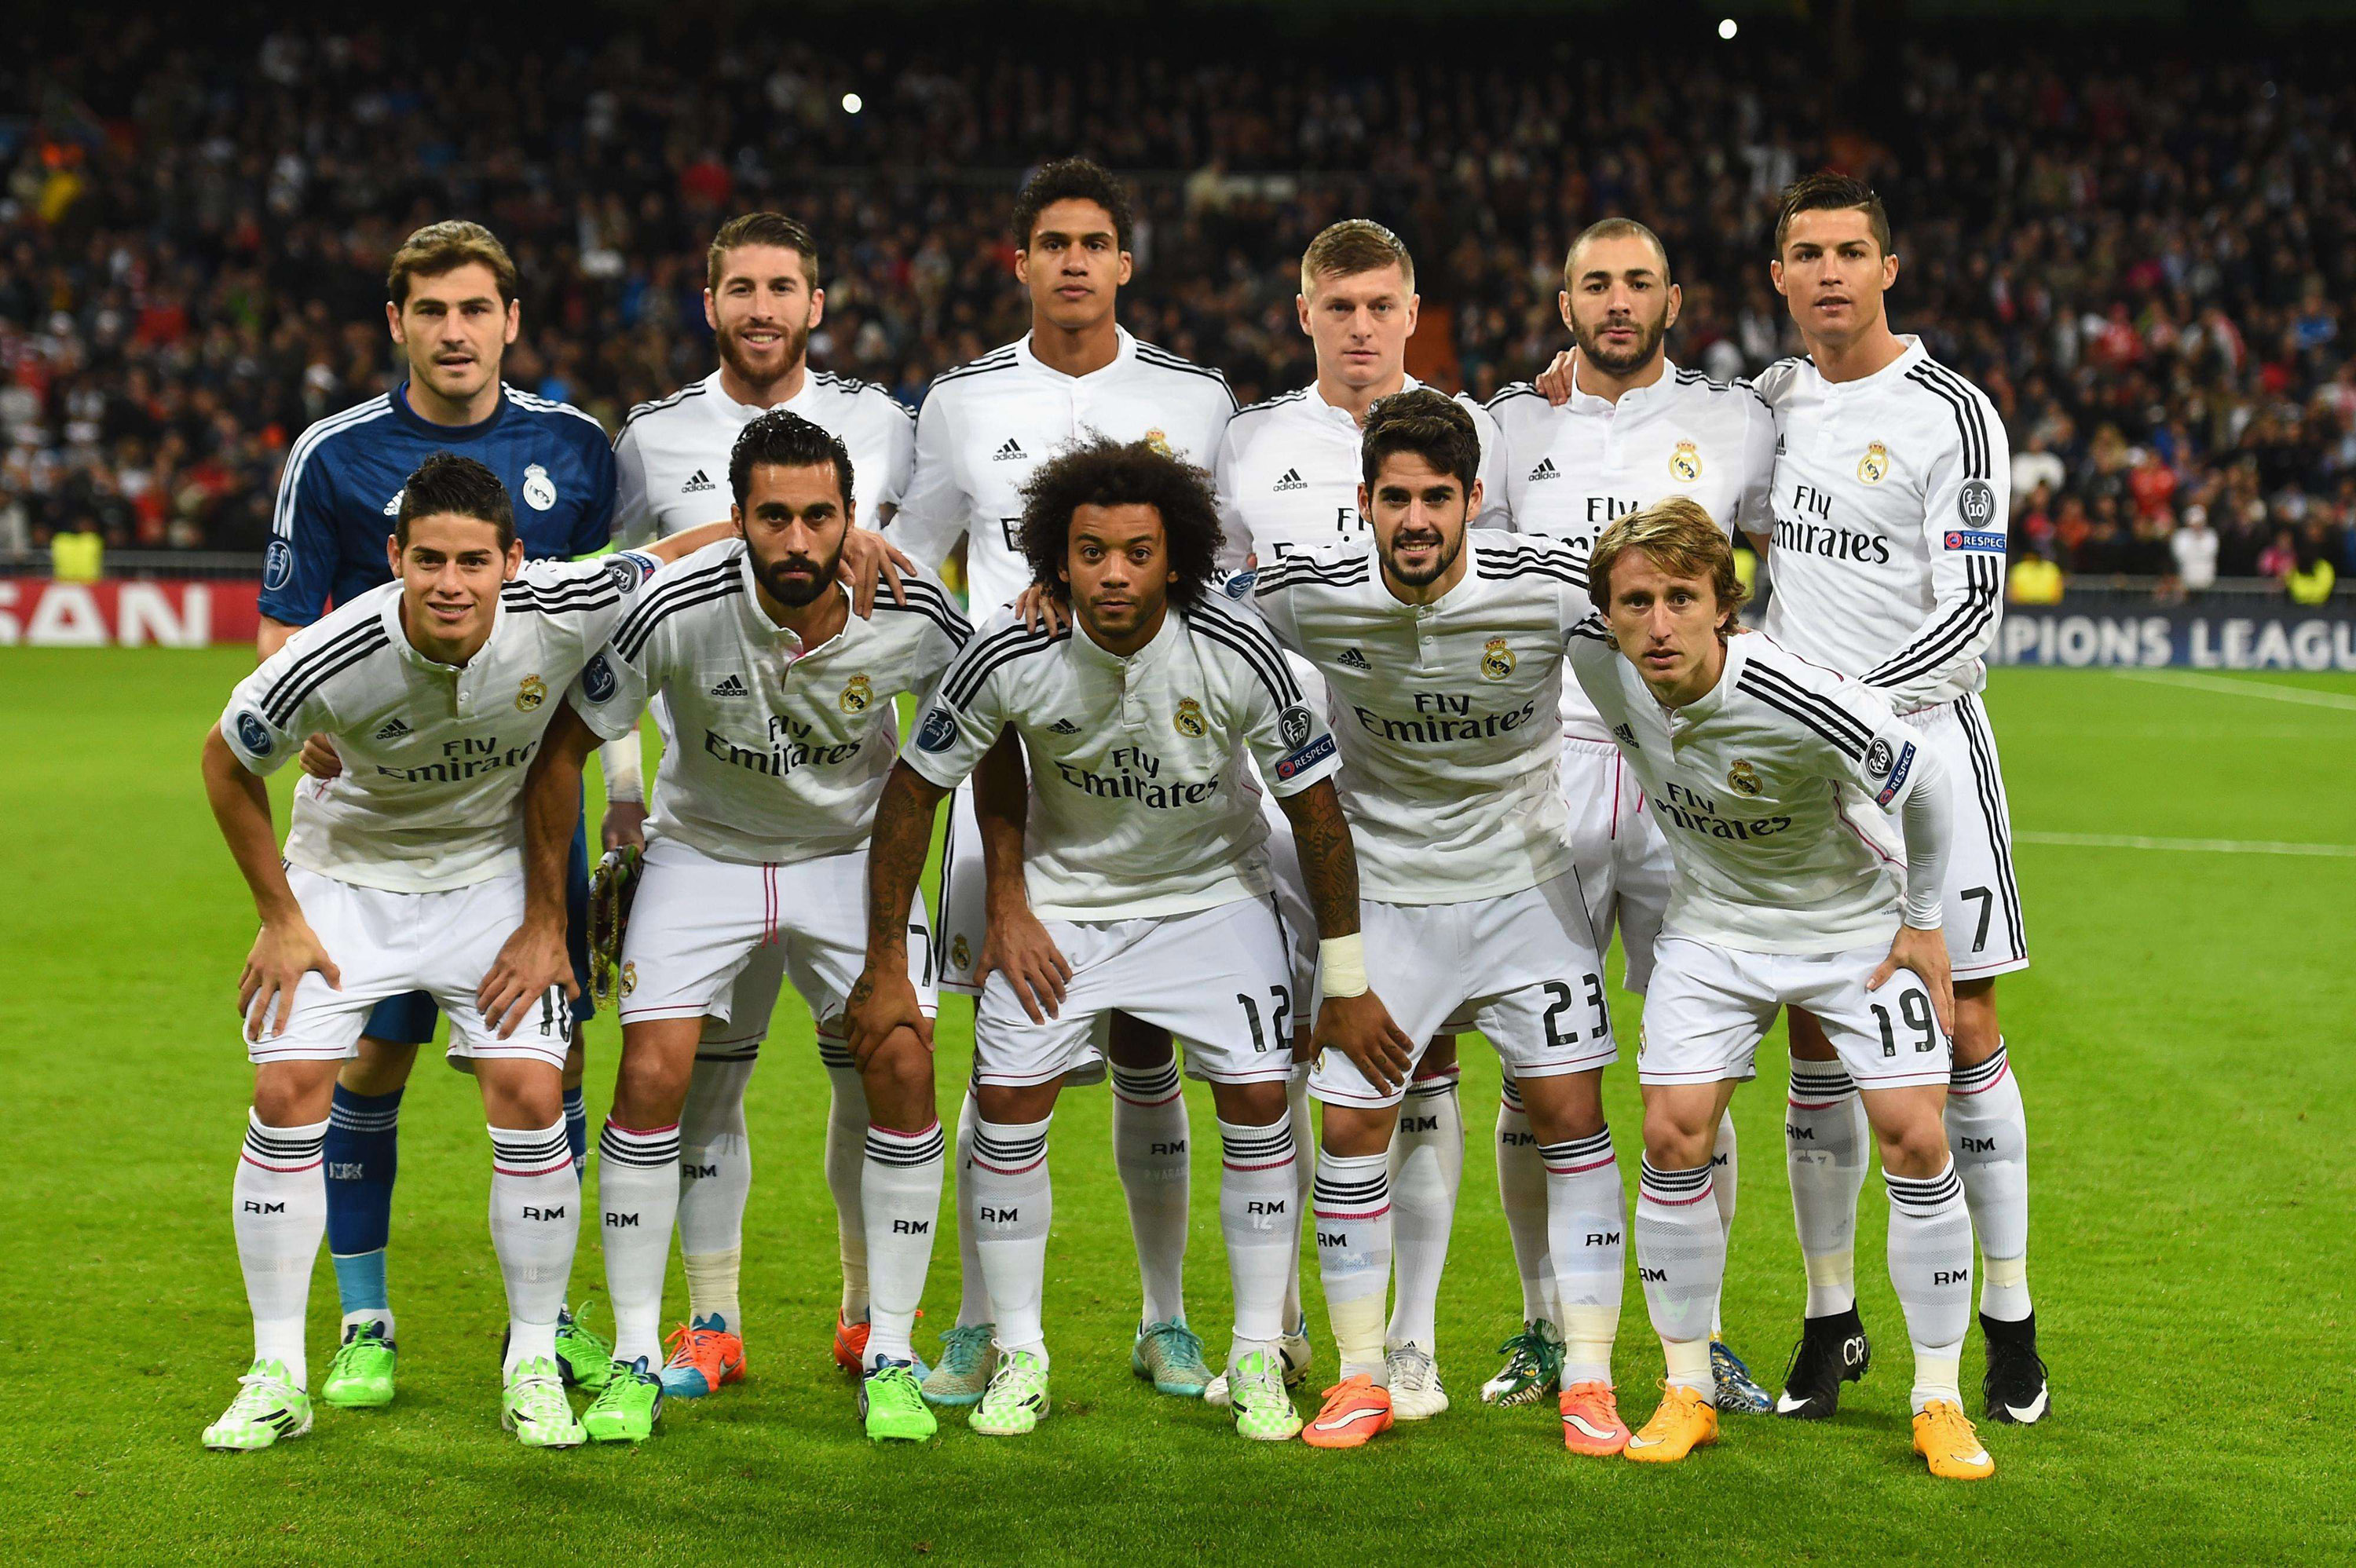 Real Madrid 2014-2015 92 points